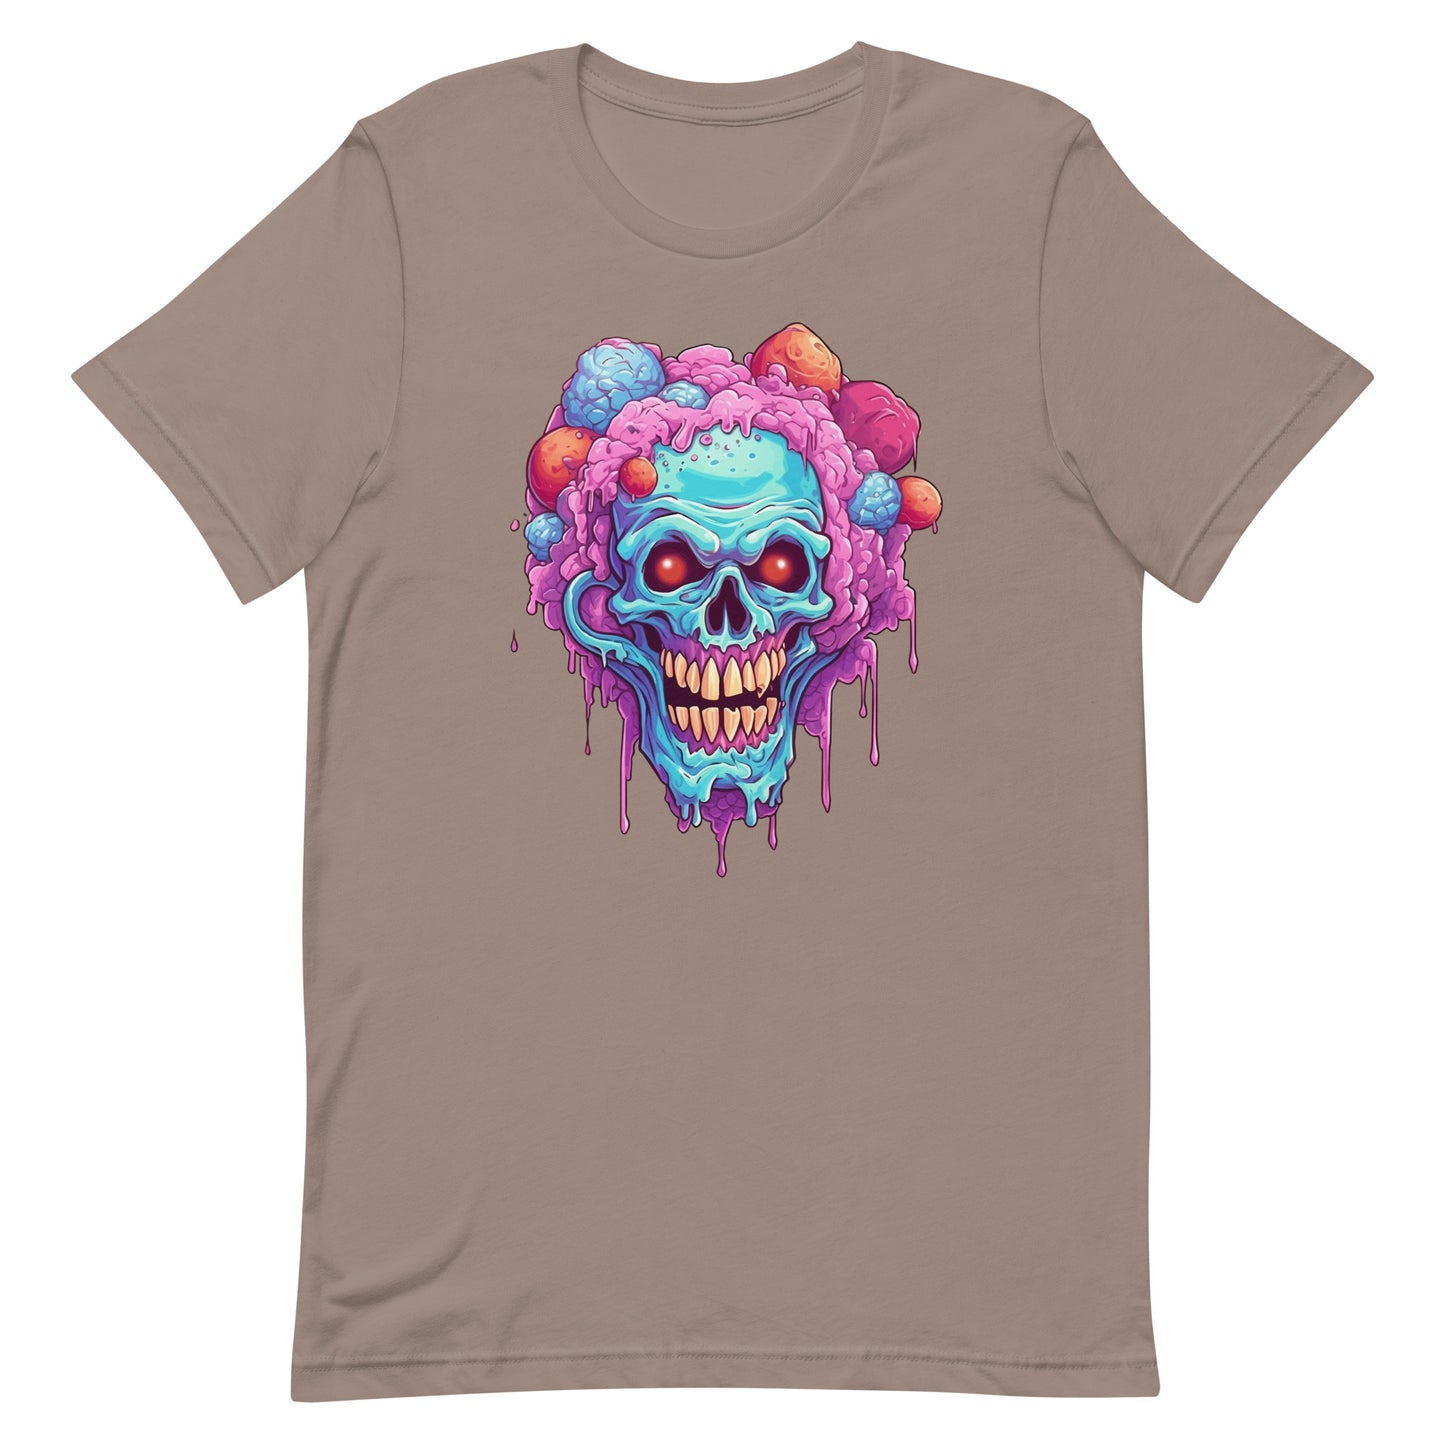 Skull head that has a purple and blue candy, Ice cream skull and red eyes, Creepy clown, Cartoon skull with crazy hair and dripping cola - Unisex t-shirt